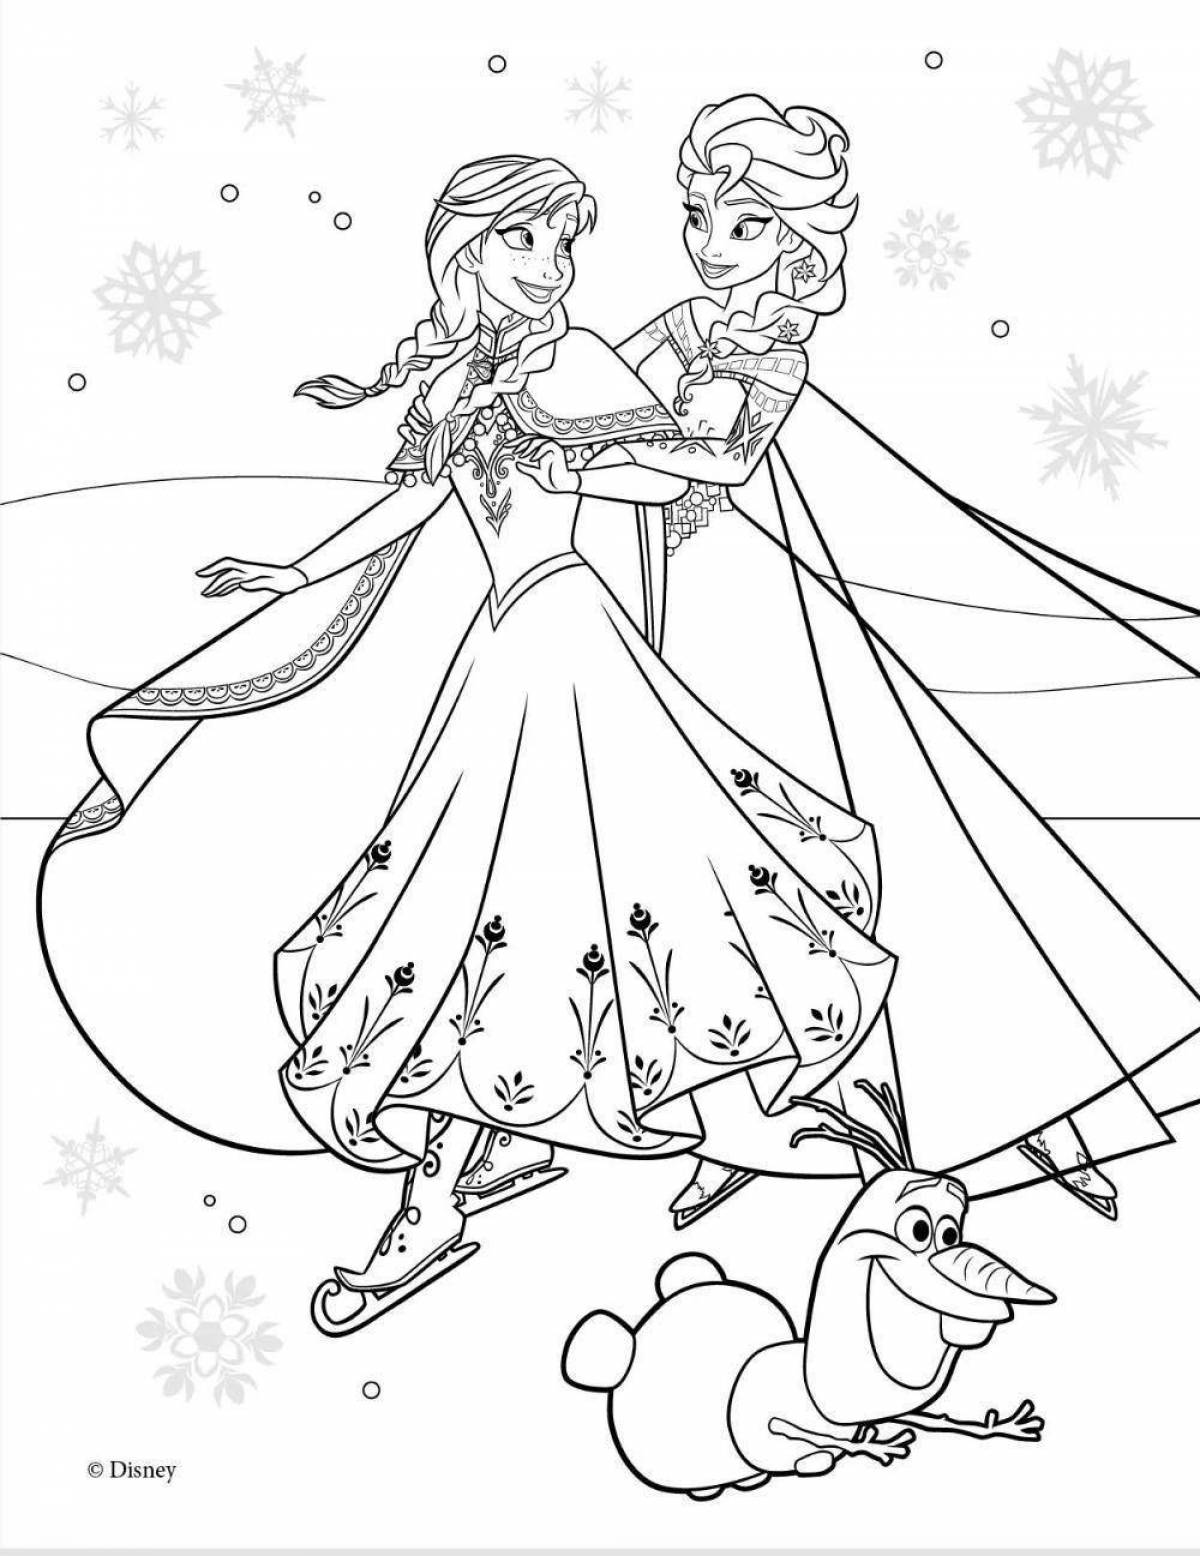 Magic coloring for girls elsa and anna